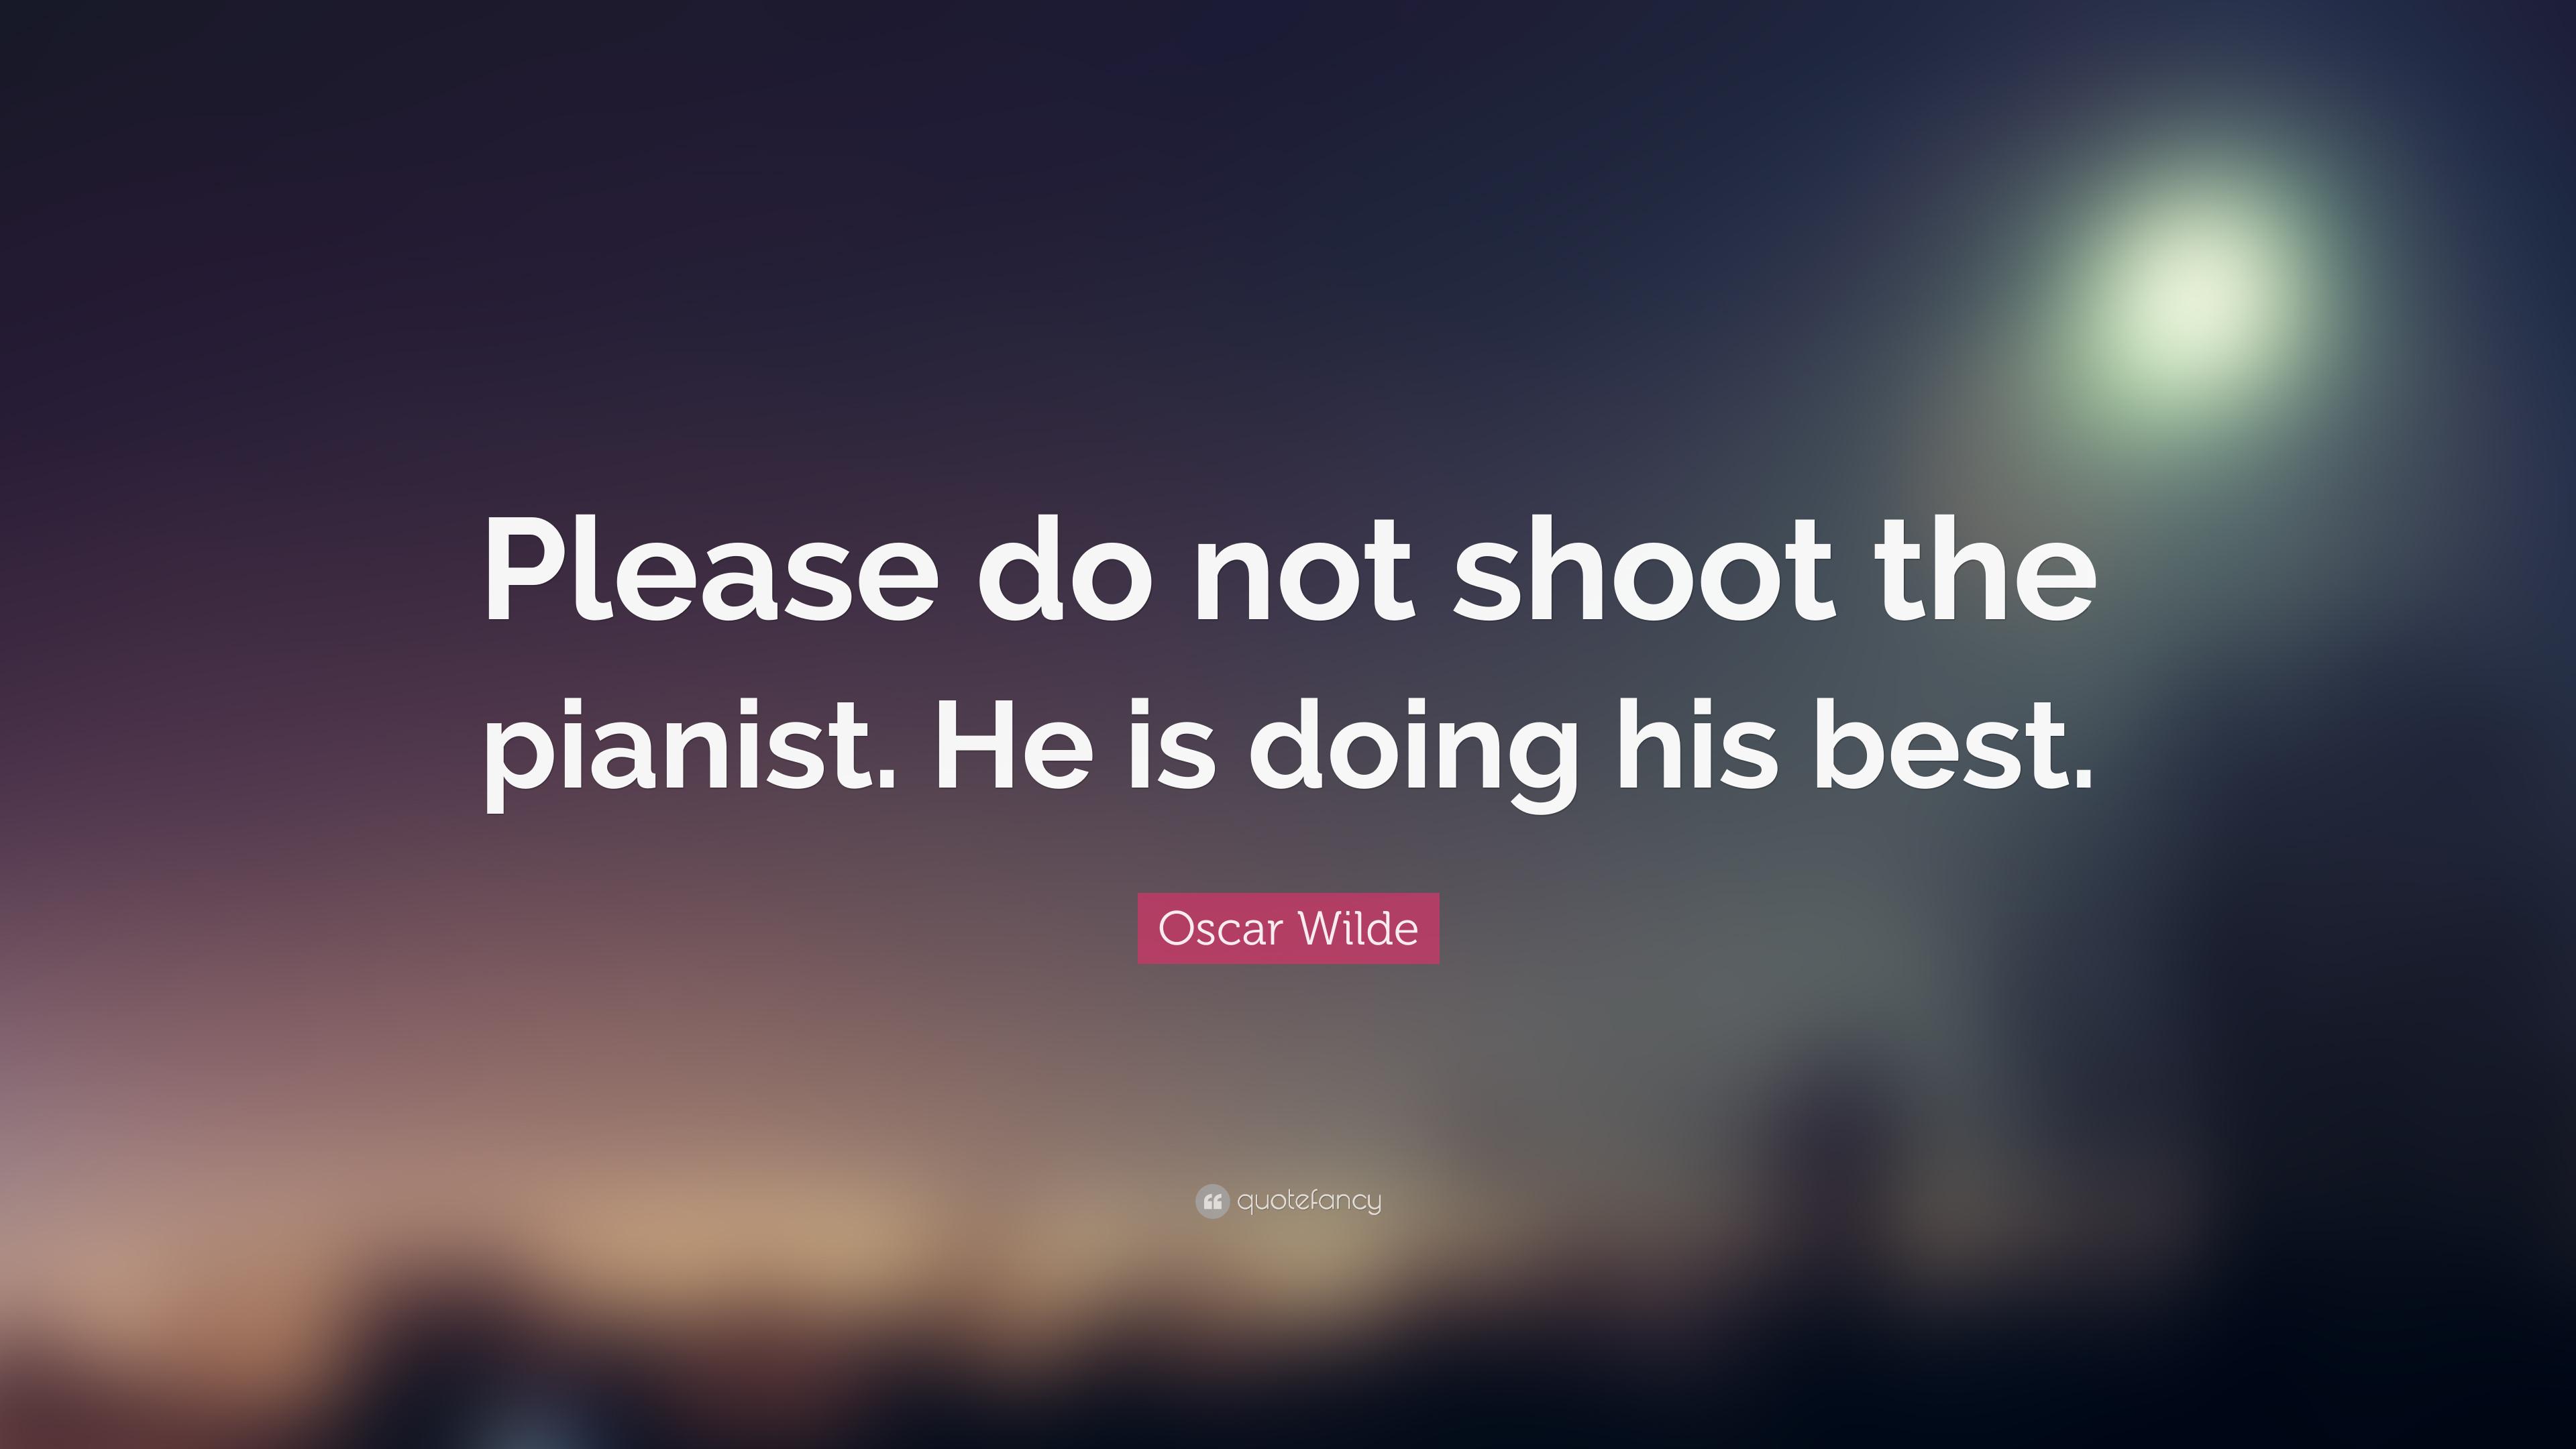 Oscar Wilde Quote: “Please do not shoot the pianist. He is doing his